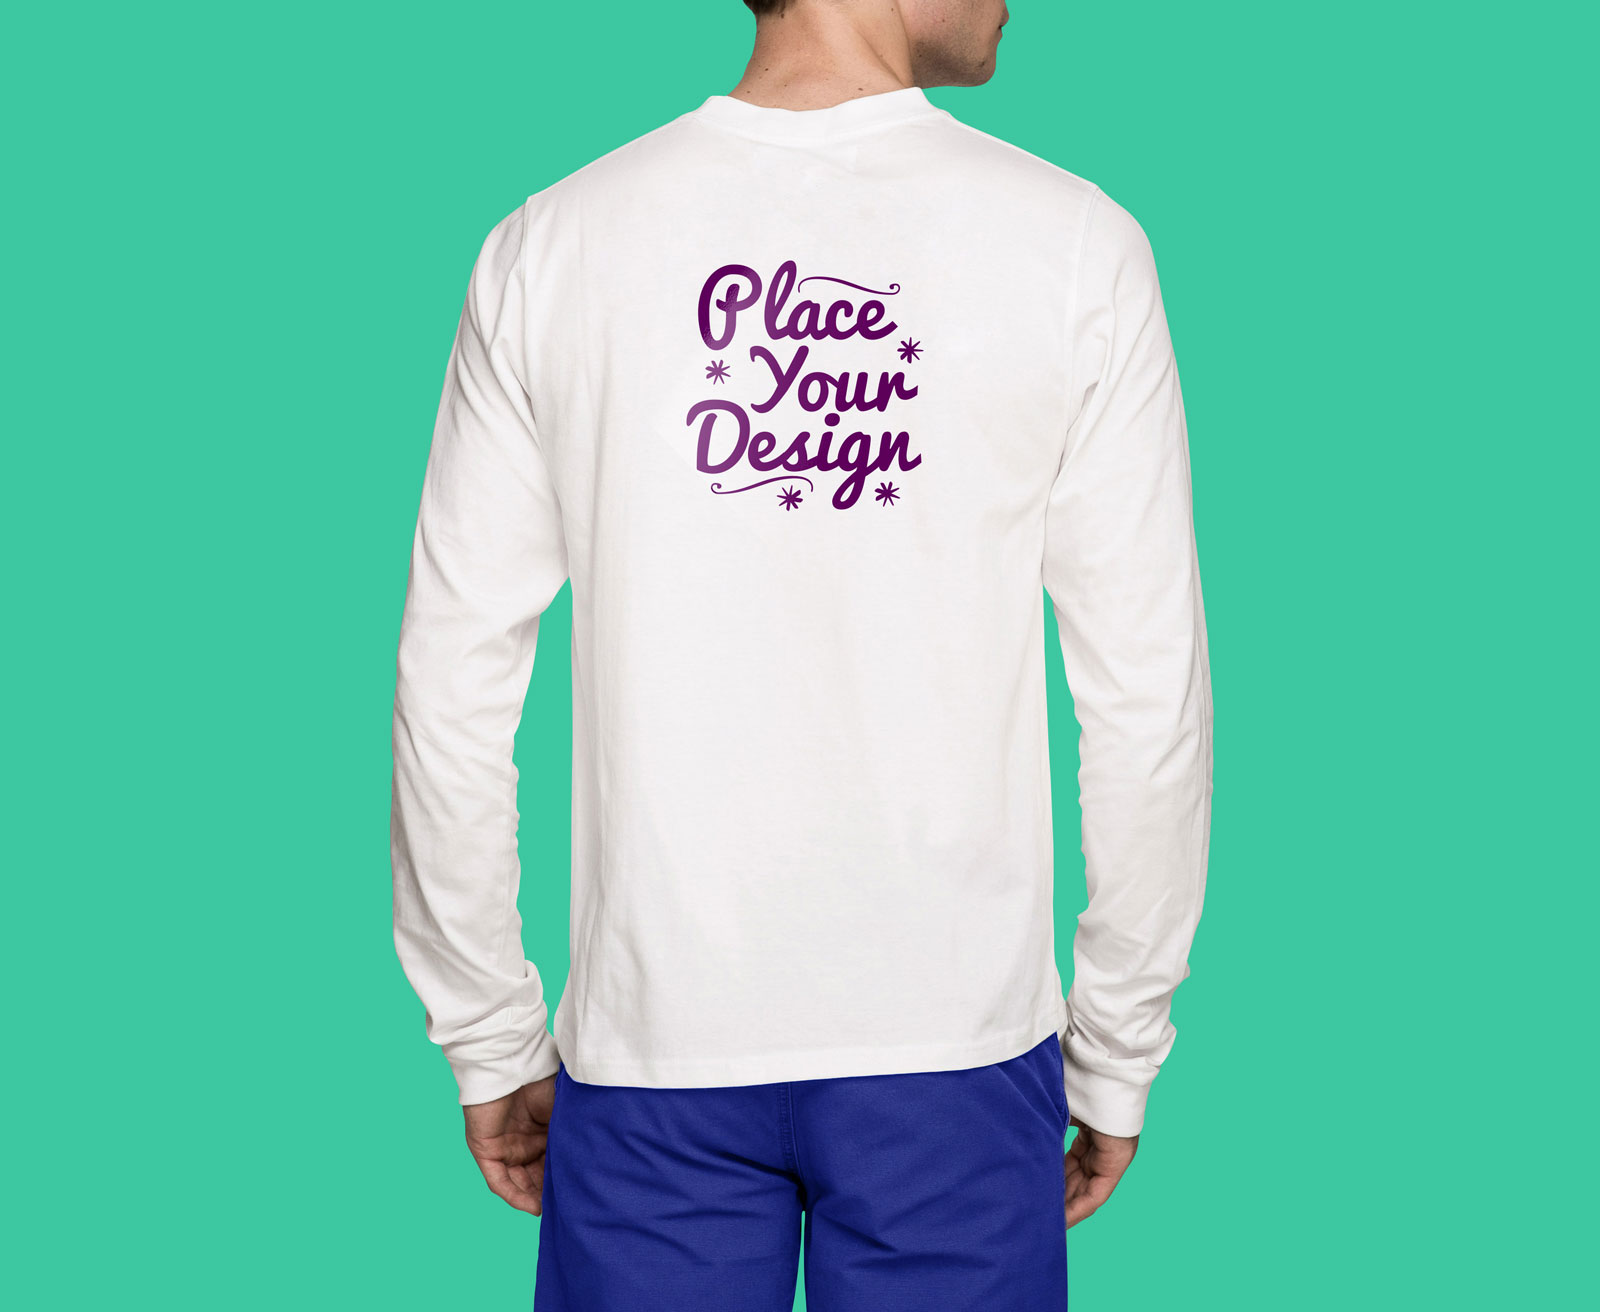 Download Free 2757+ T Shirt Mockup Cdr File Yellowimages Mockups free packaging mockups from the trusted websites.